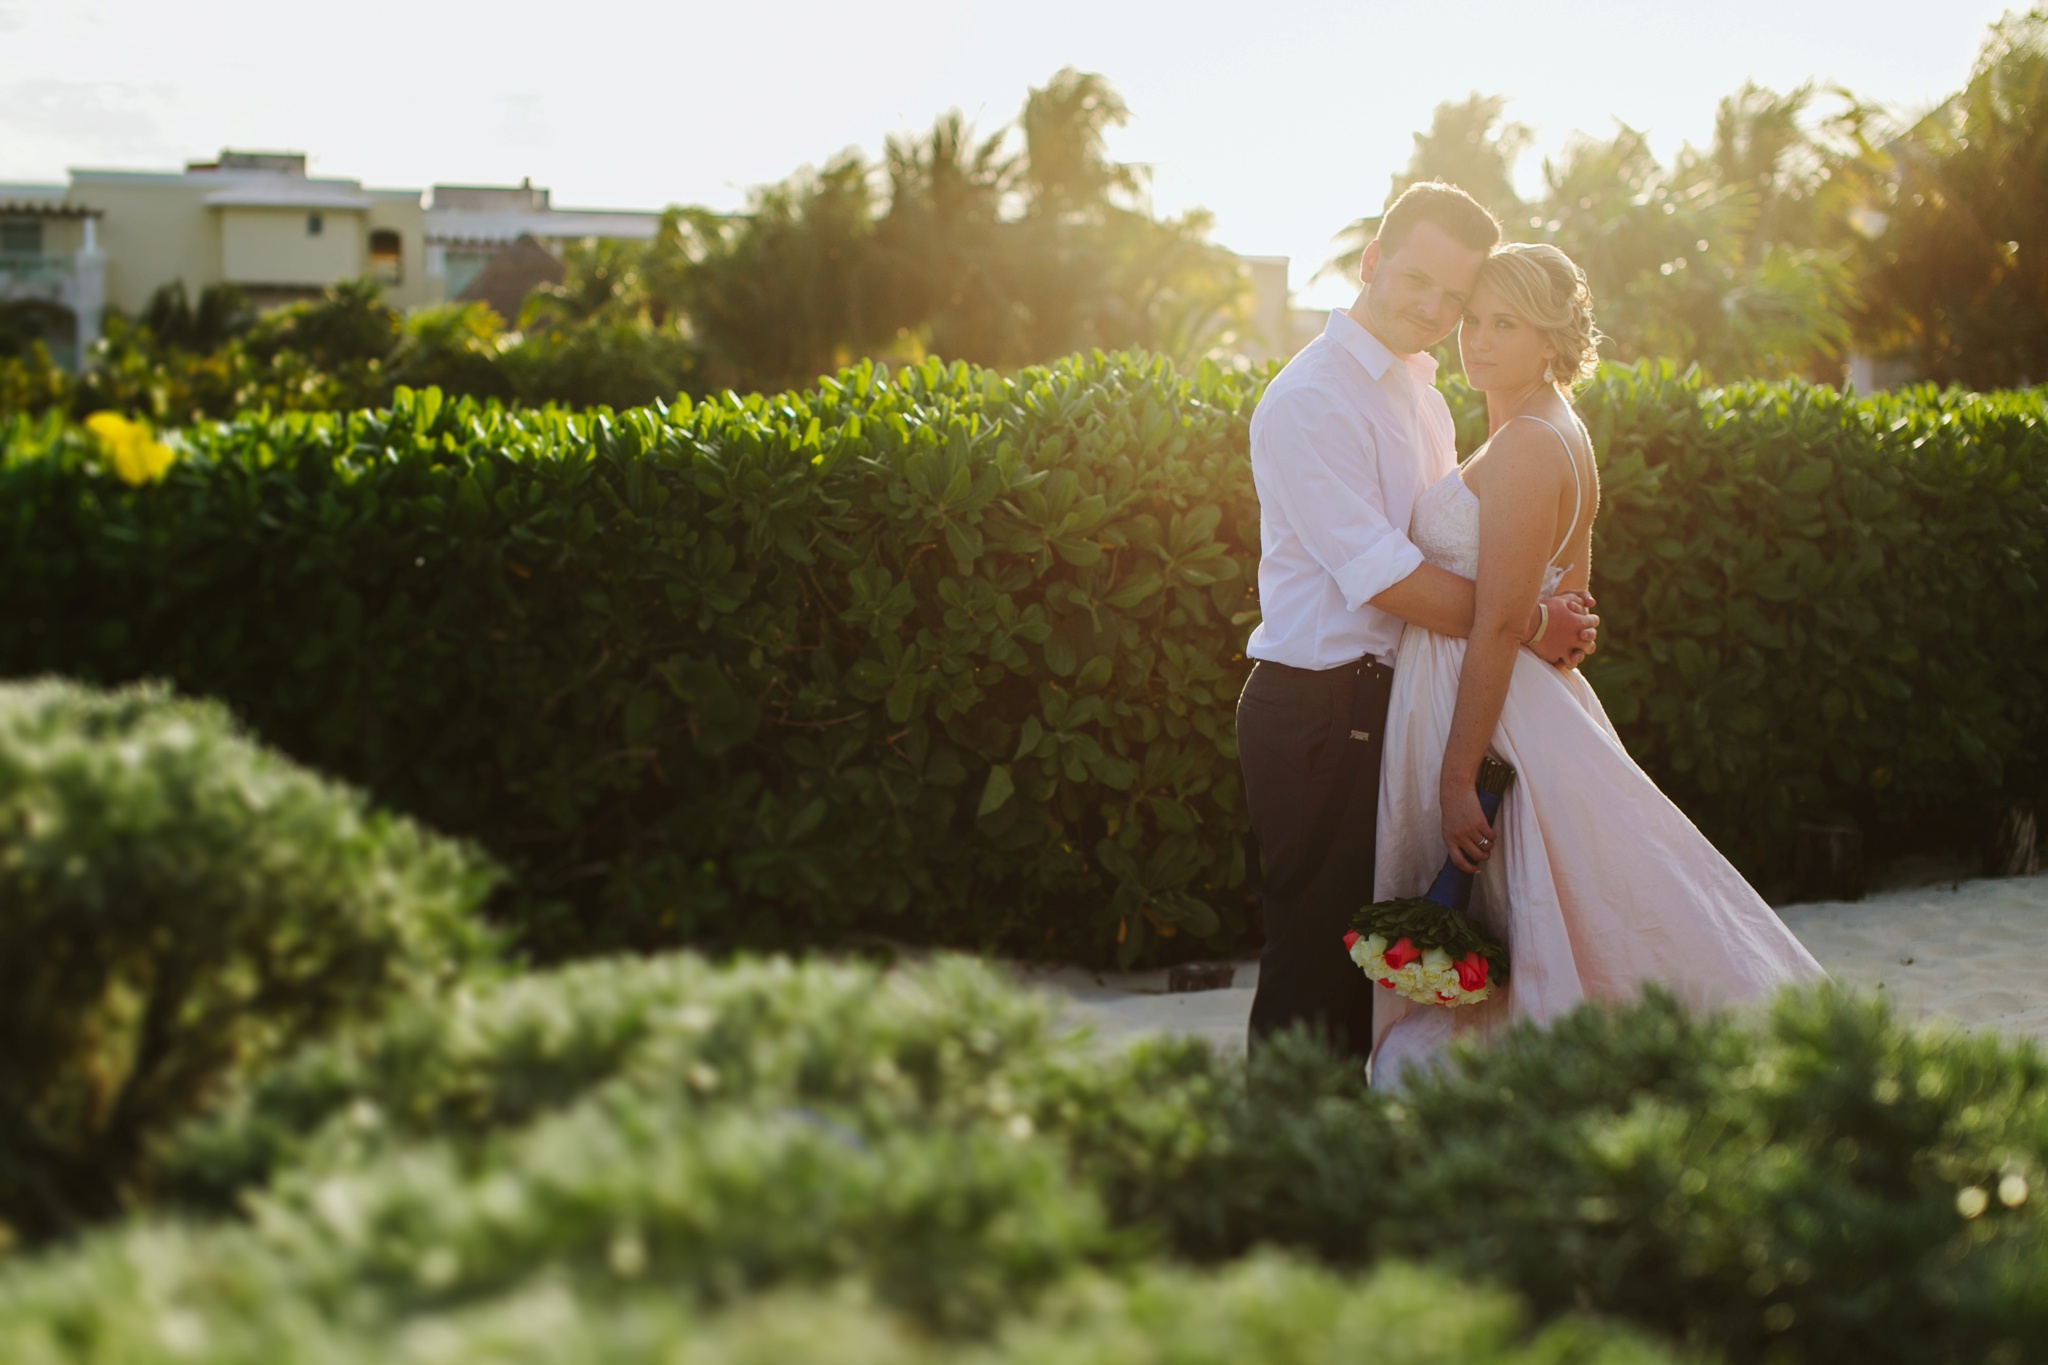 Moon Palace Resort Cancun Mexico Wedding Photos Bride and Groom Hugging at Sunset